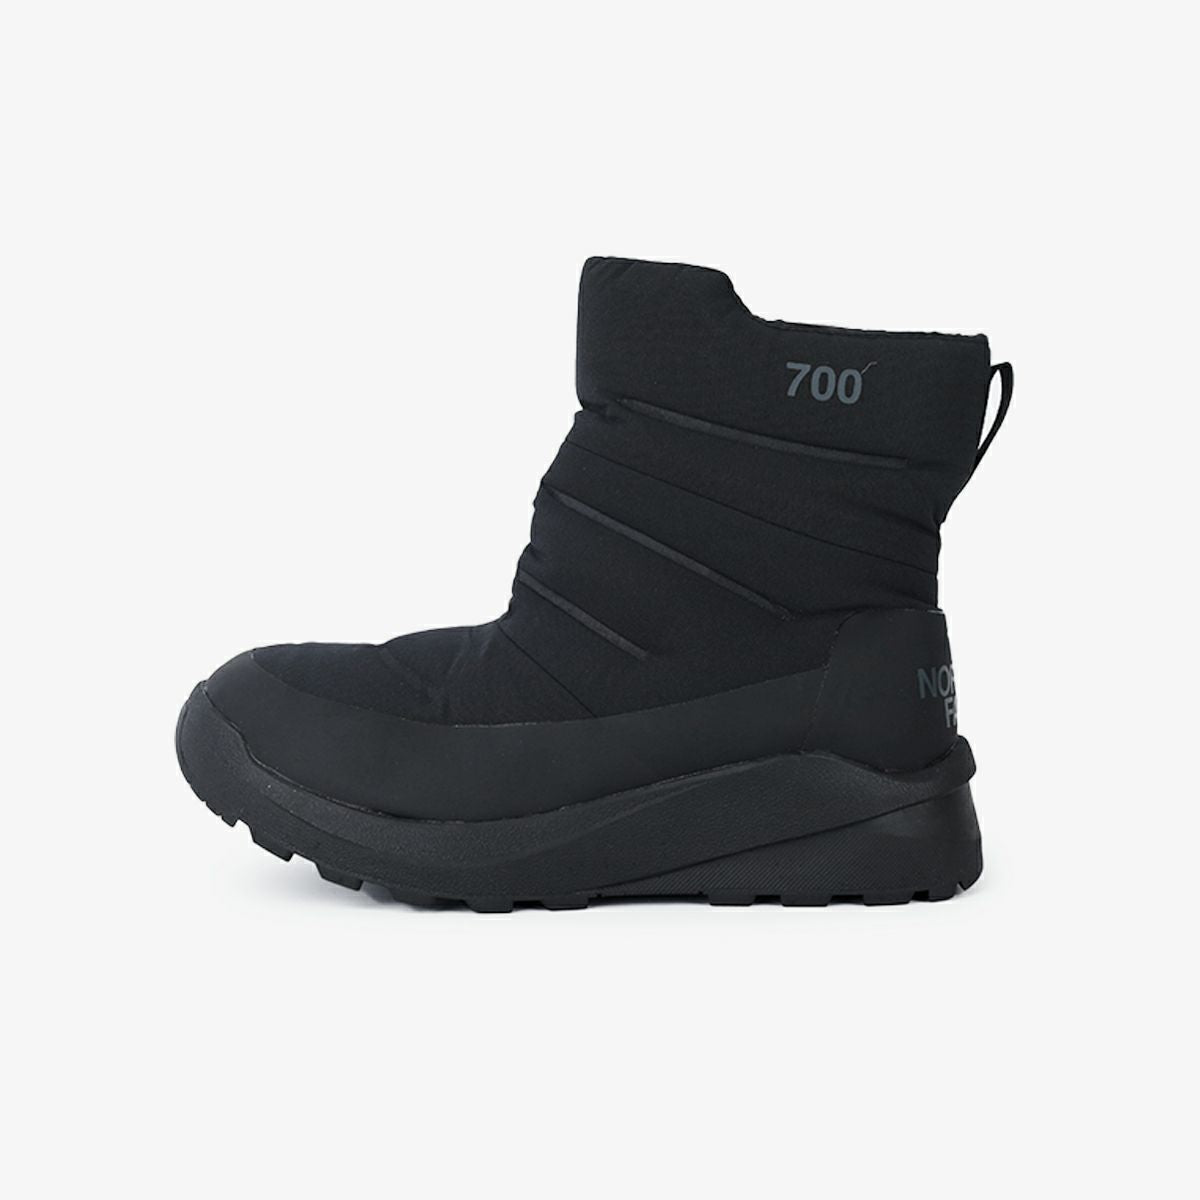 THE NORTH FACE NUPTSE DOWN BOOTIE II WP nf02275 – KICKS LAB.